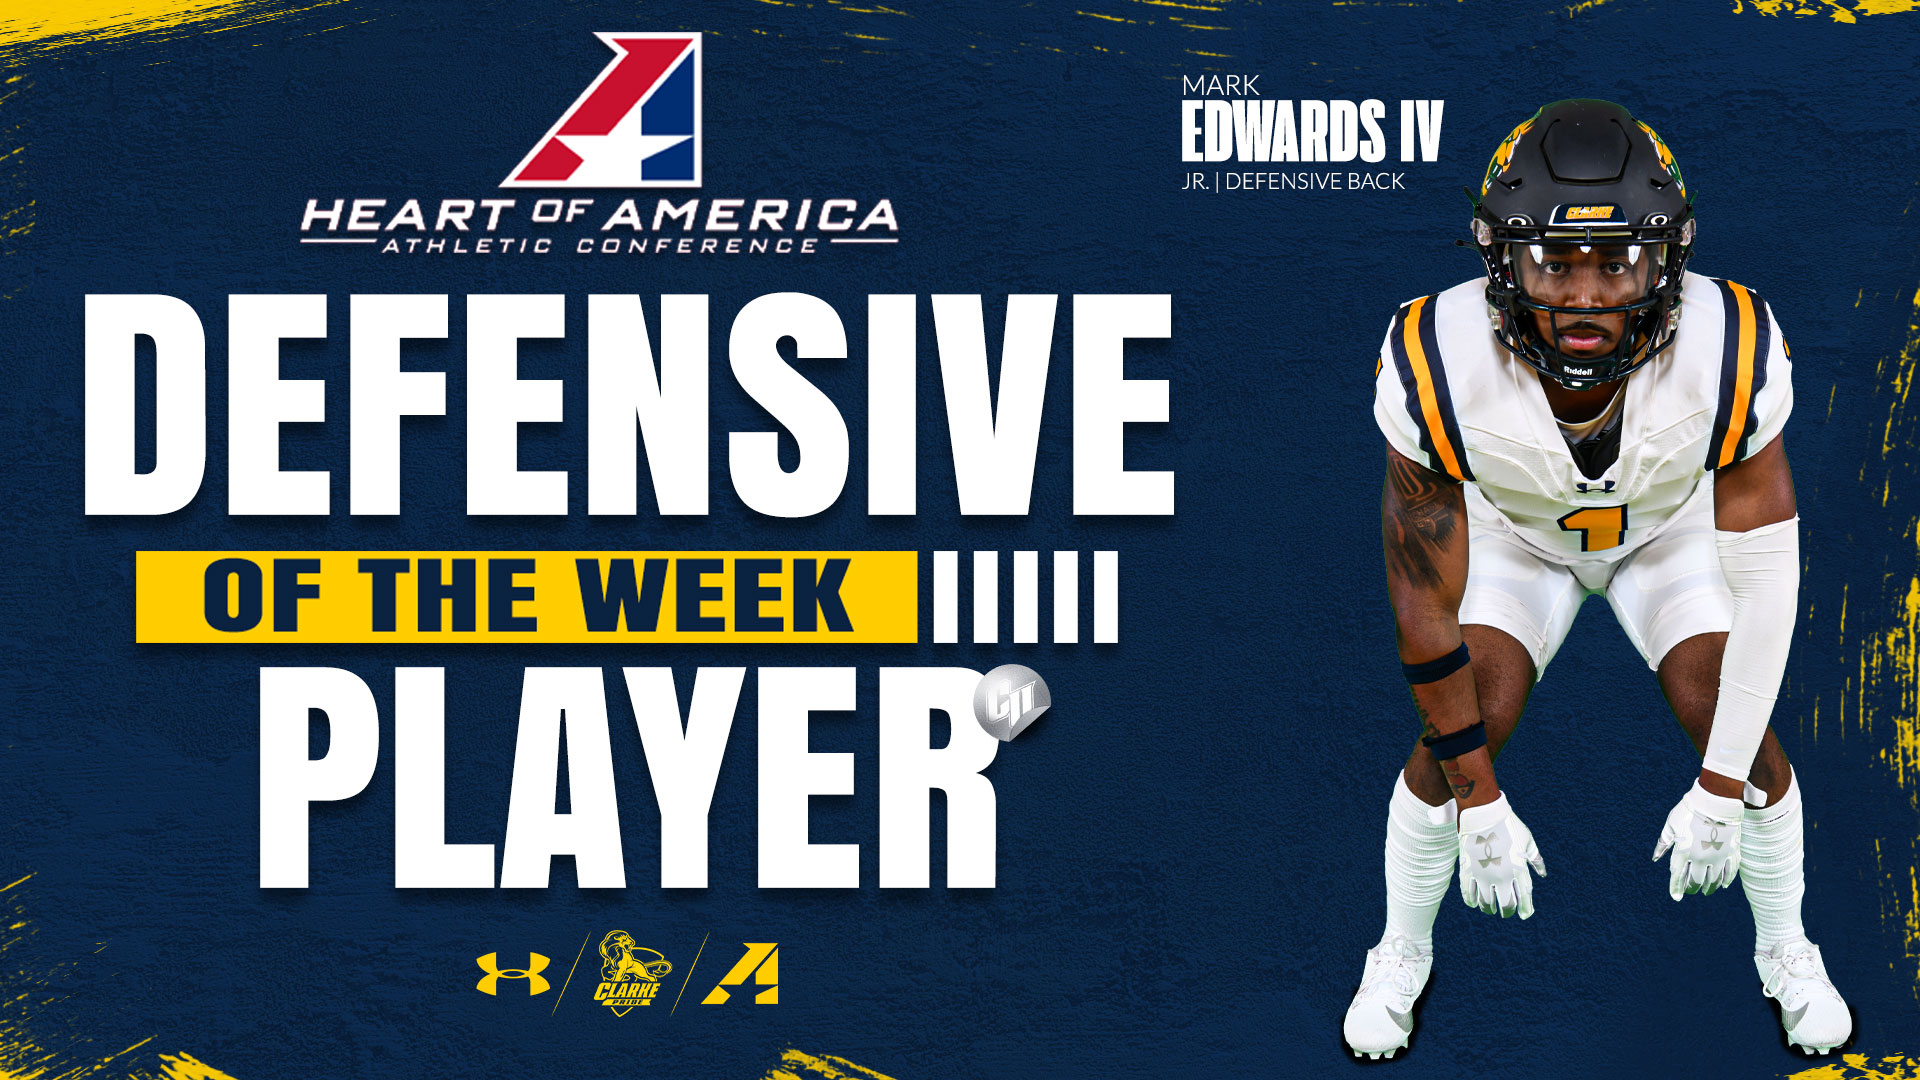 Mark Edwards IV's all-around performance leads to Heart Defensive Player of the Week honors